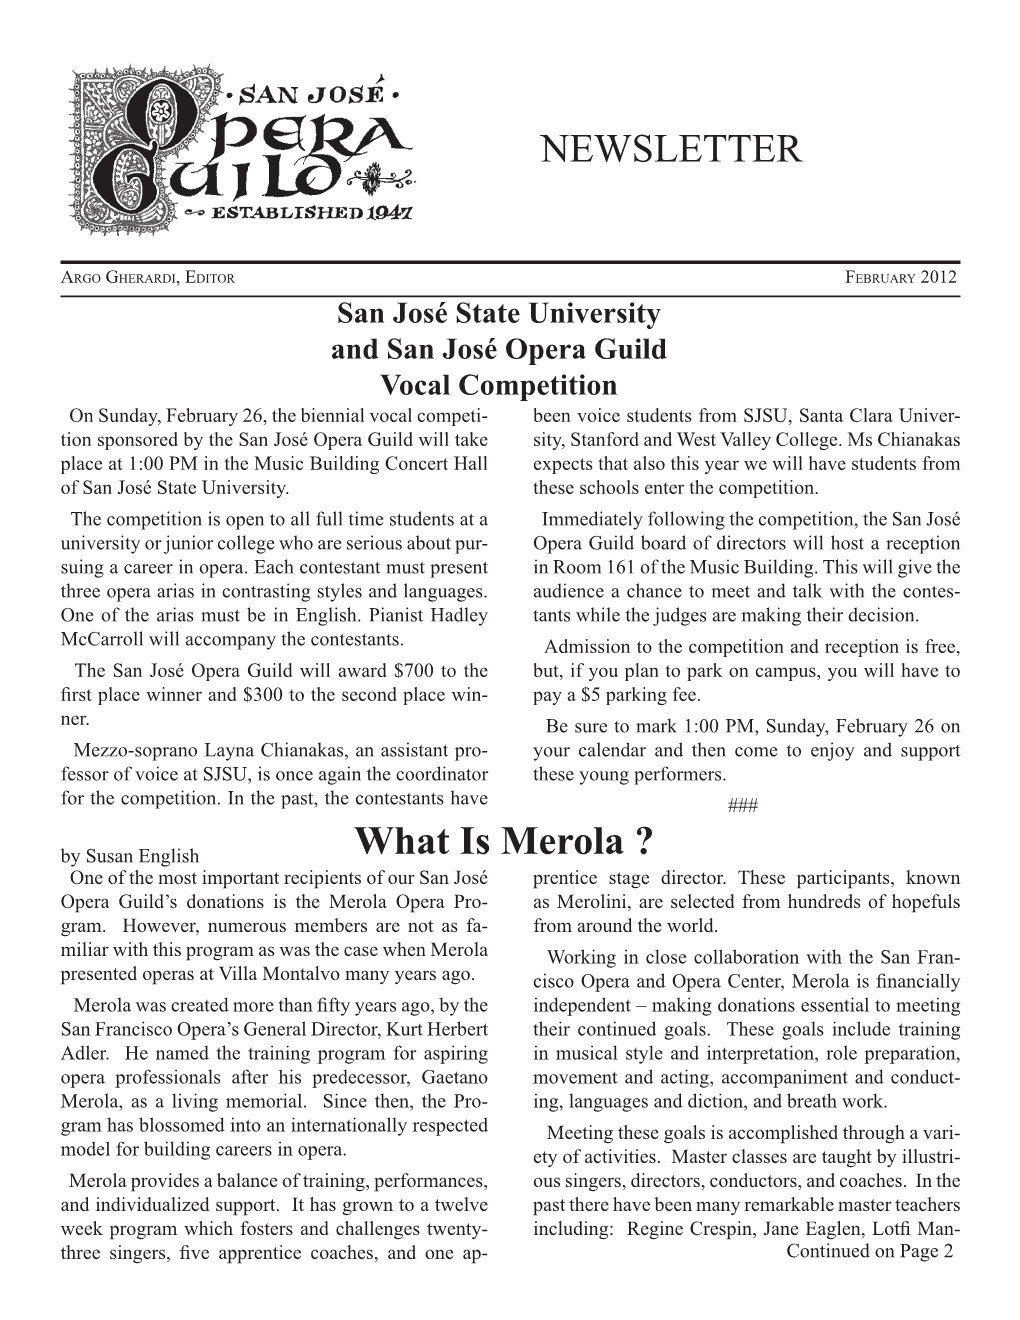 NEWSLETTER What Is Merola ?